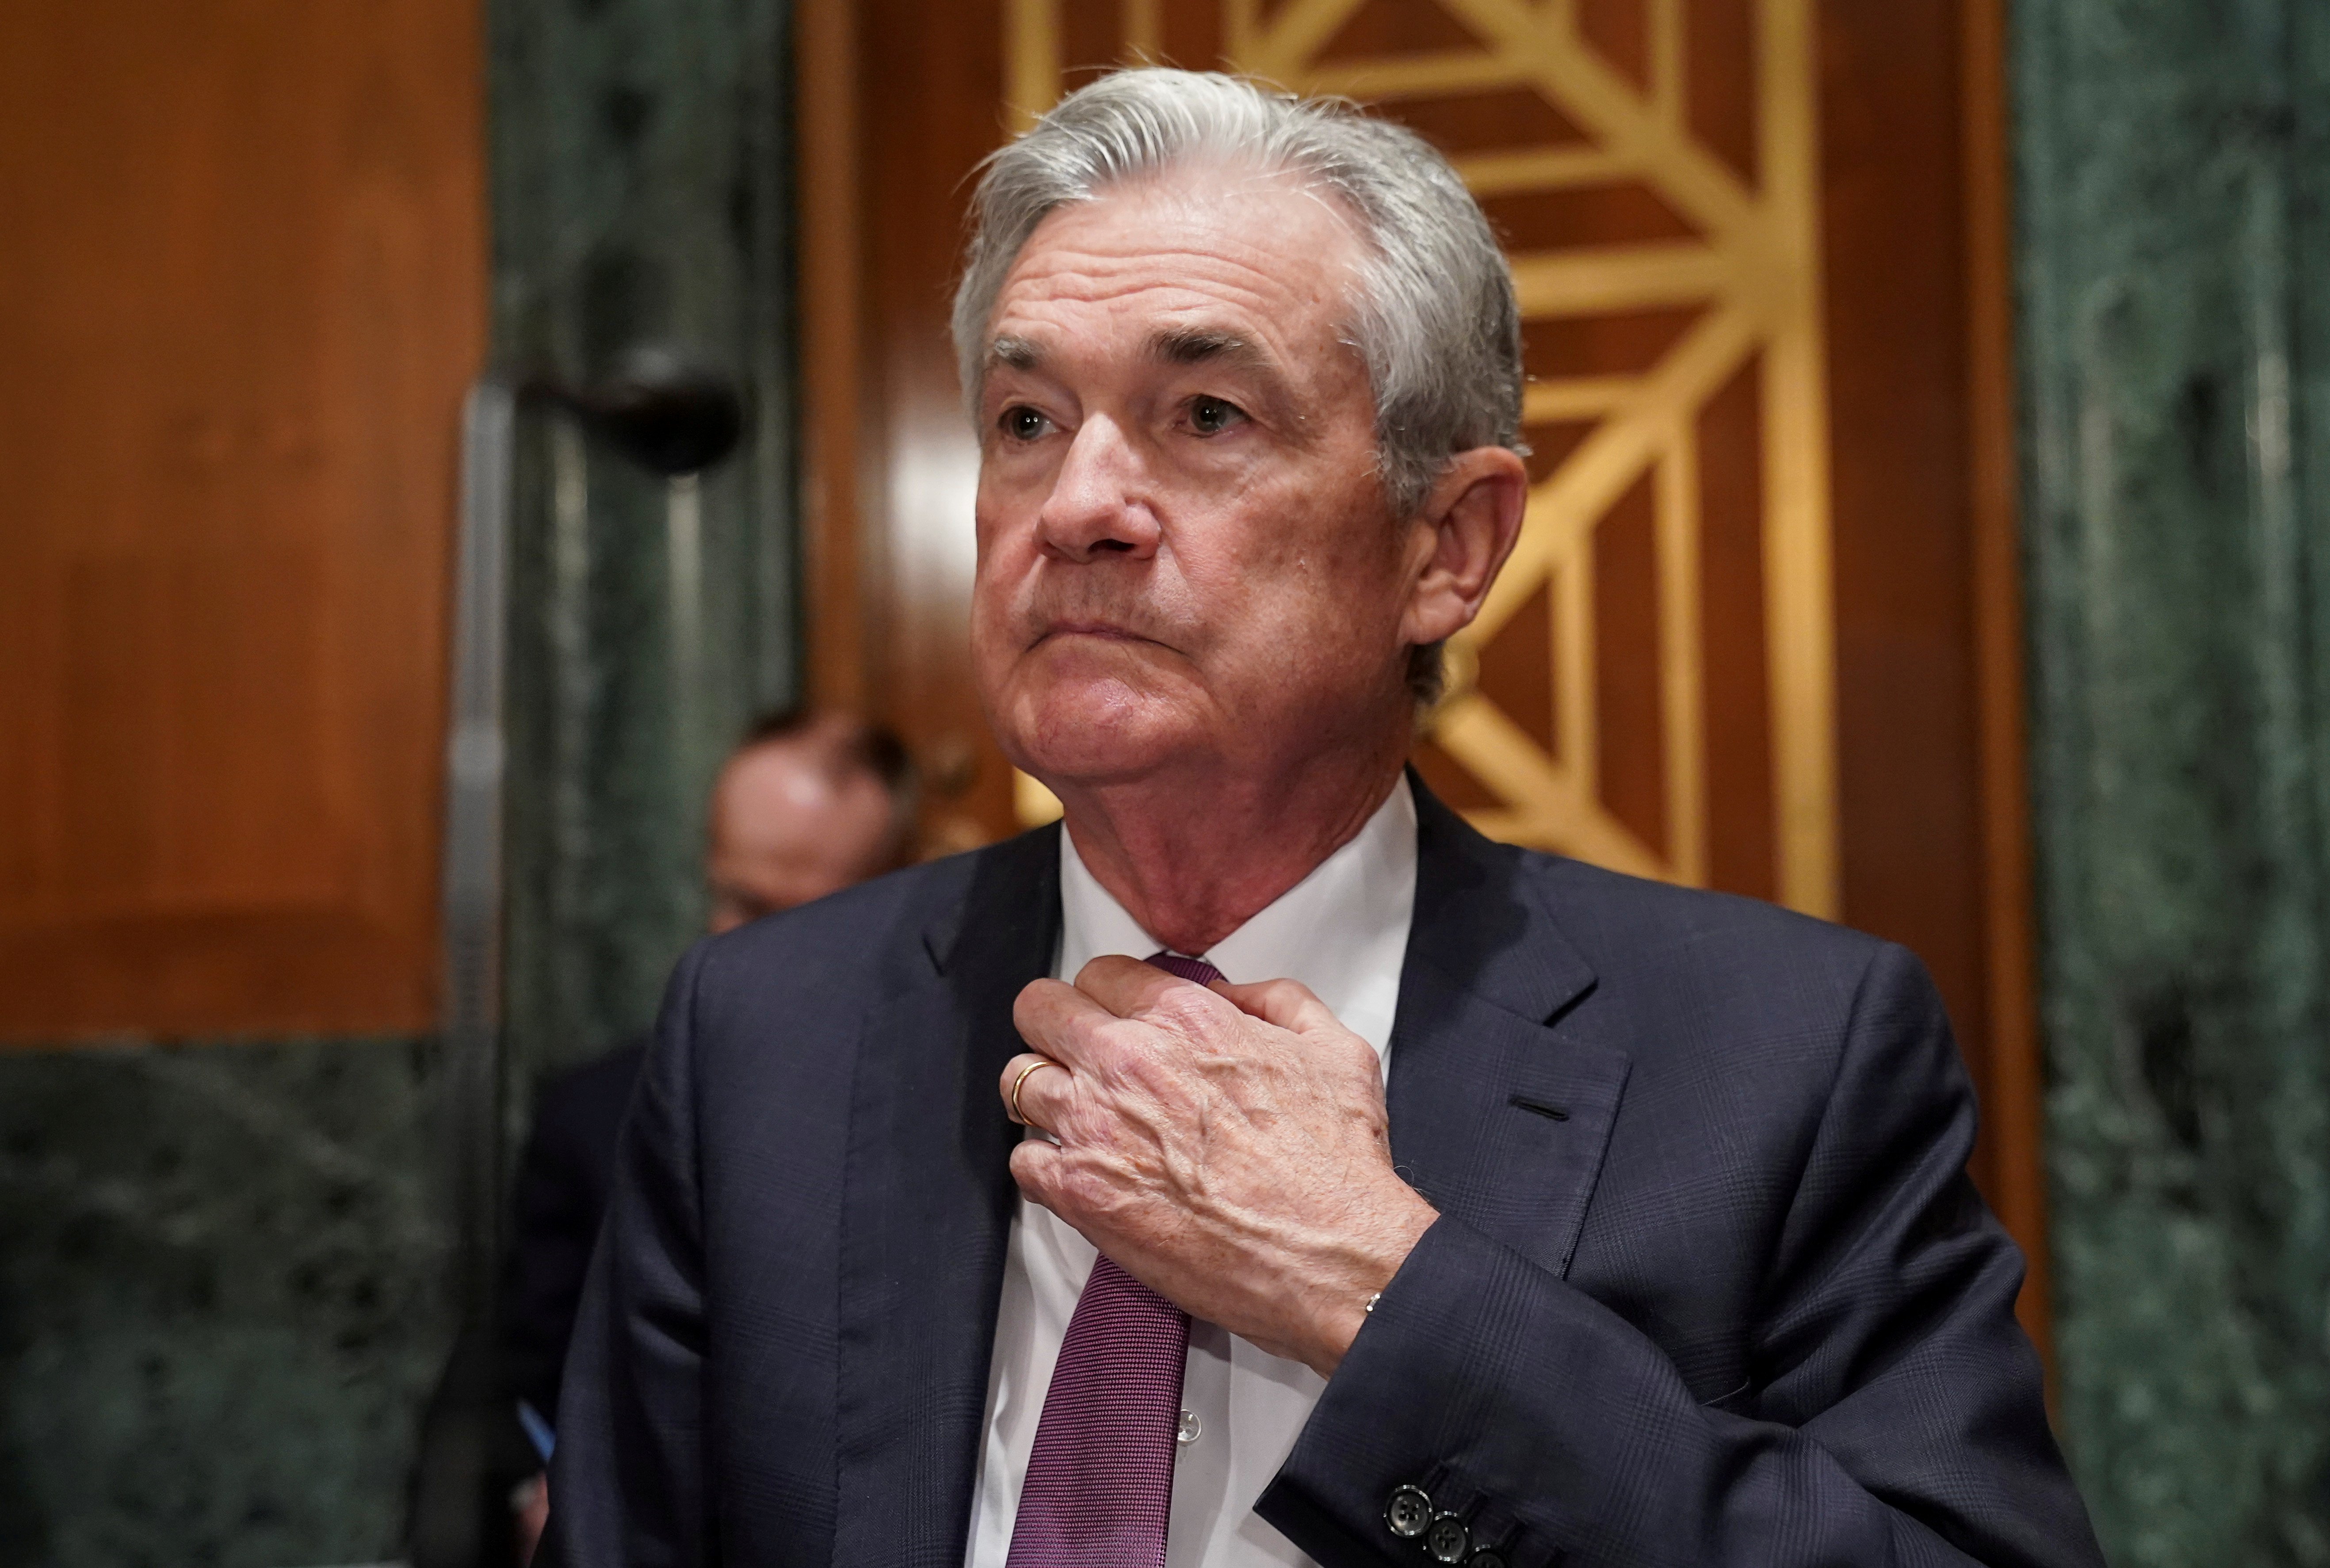 Federal Reserve Chair Jerome Powell testifies on Capitol Hill in Washington